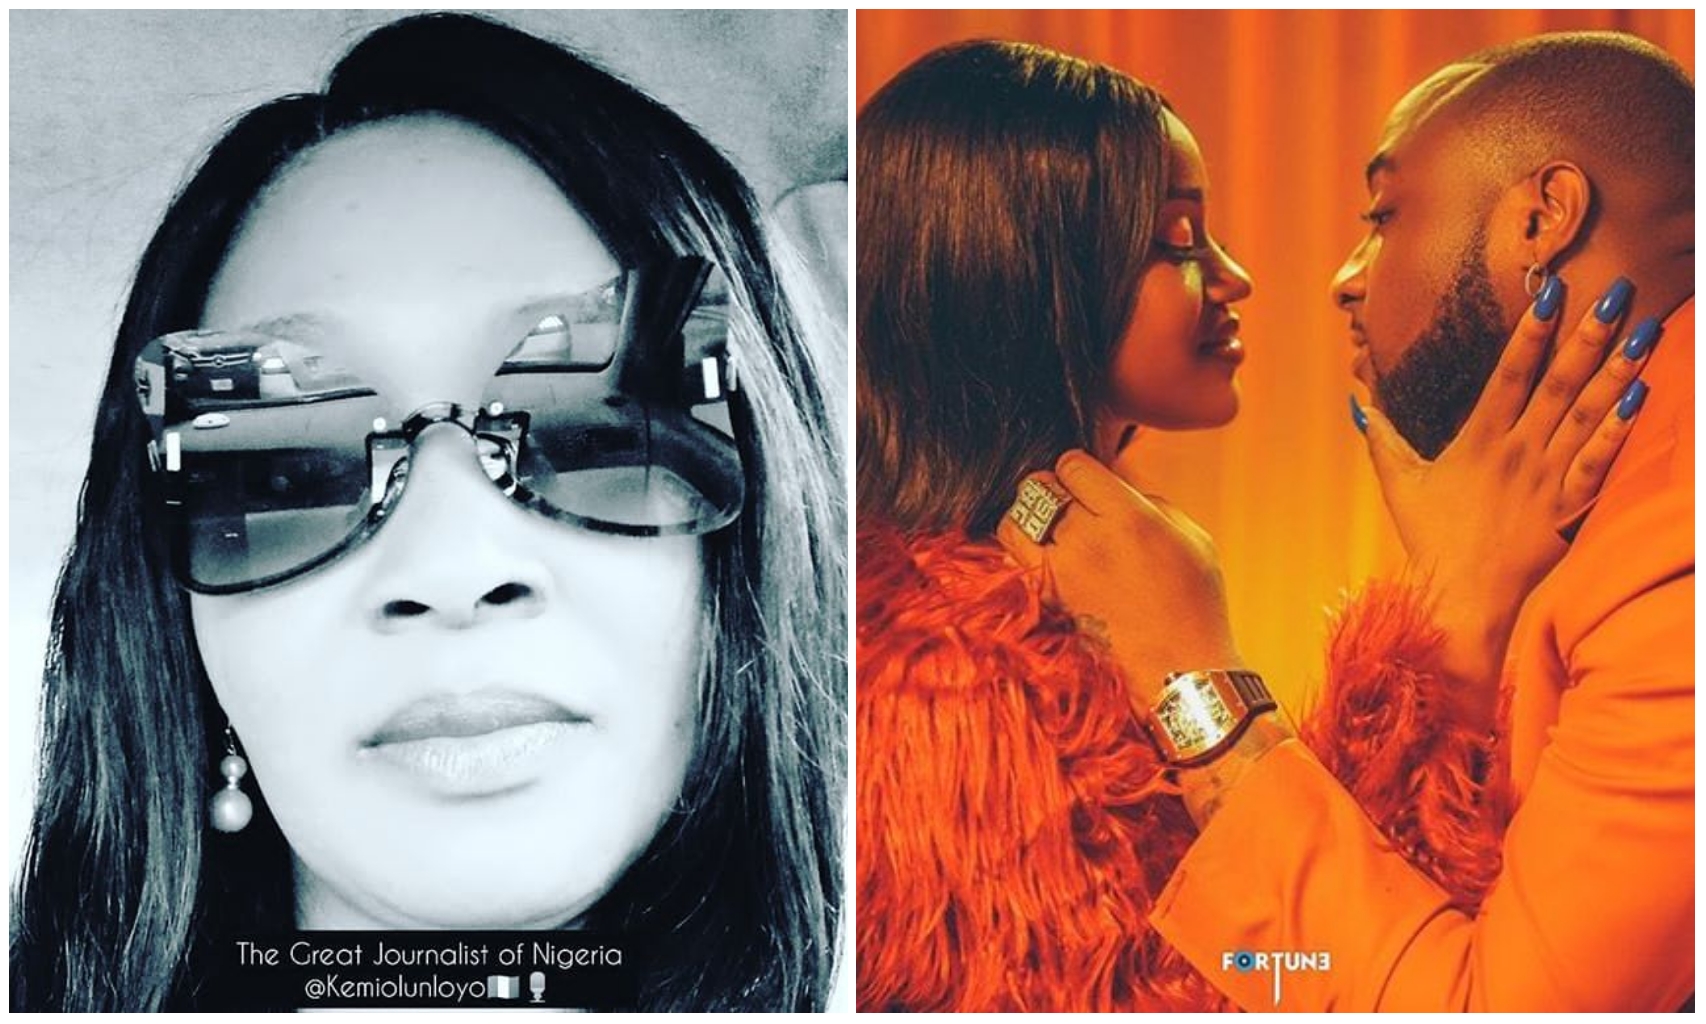 Chioma has moved out of Davido’s house - Kemi Olunloyo alleges